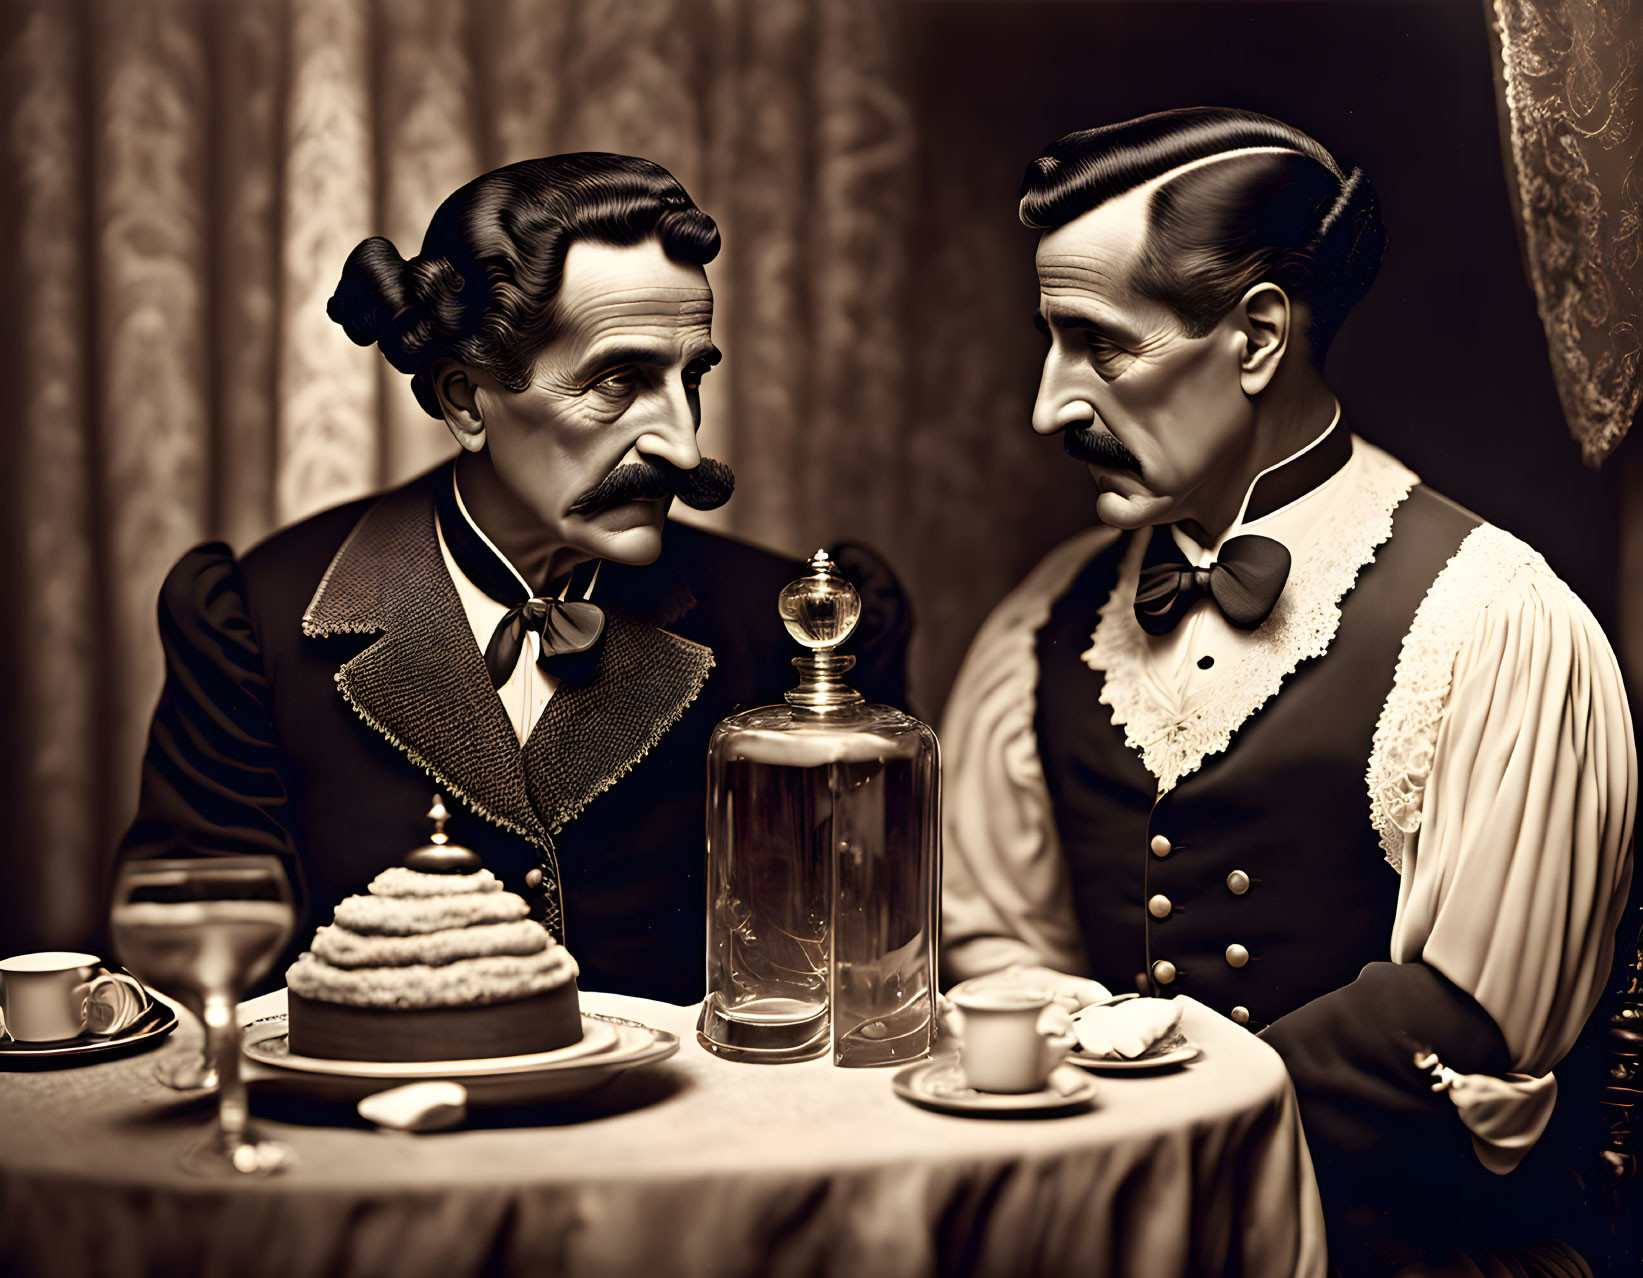 Vintage-style portrait of twin men in bow ties with cake and drink